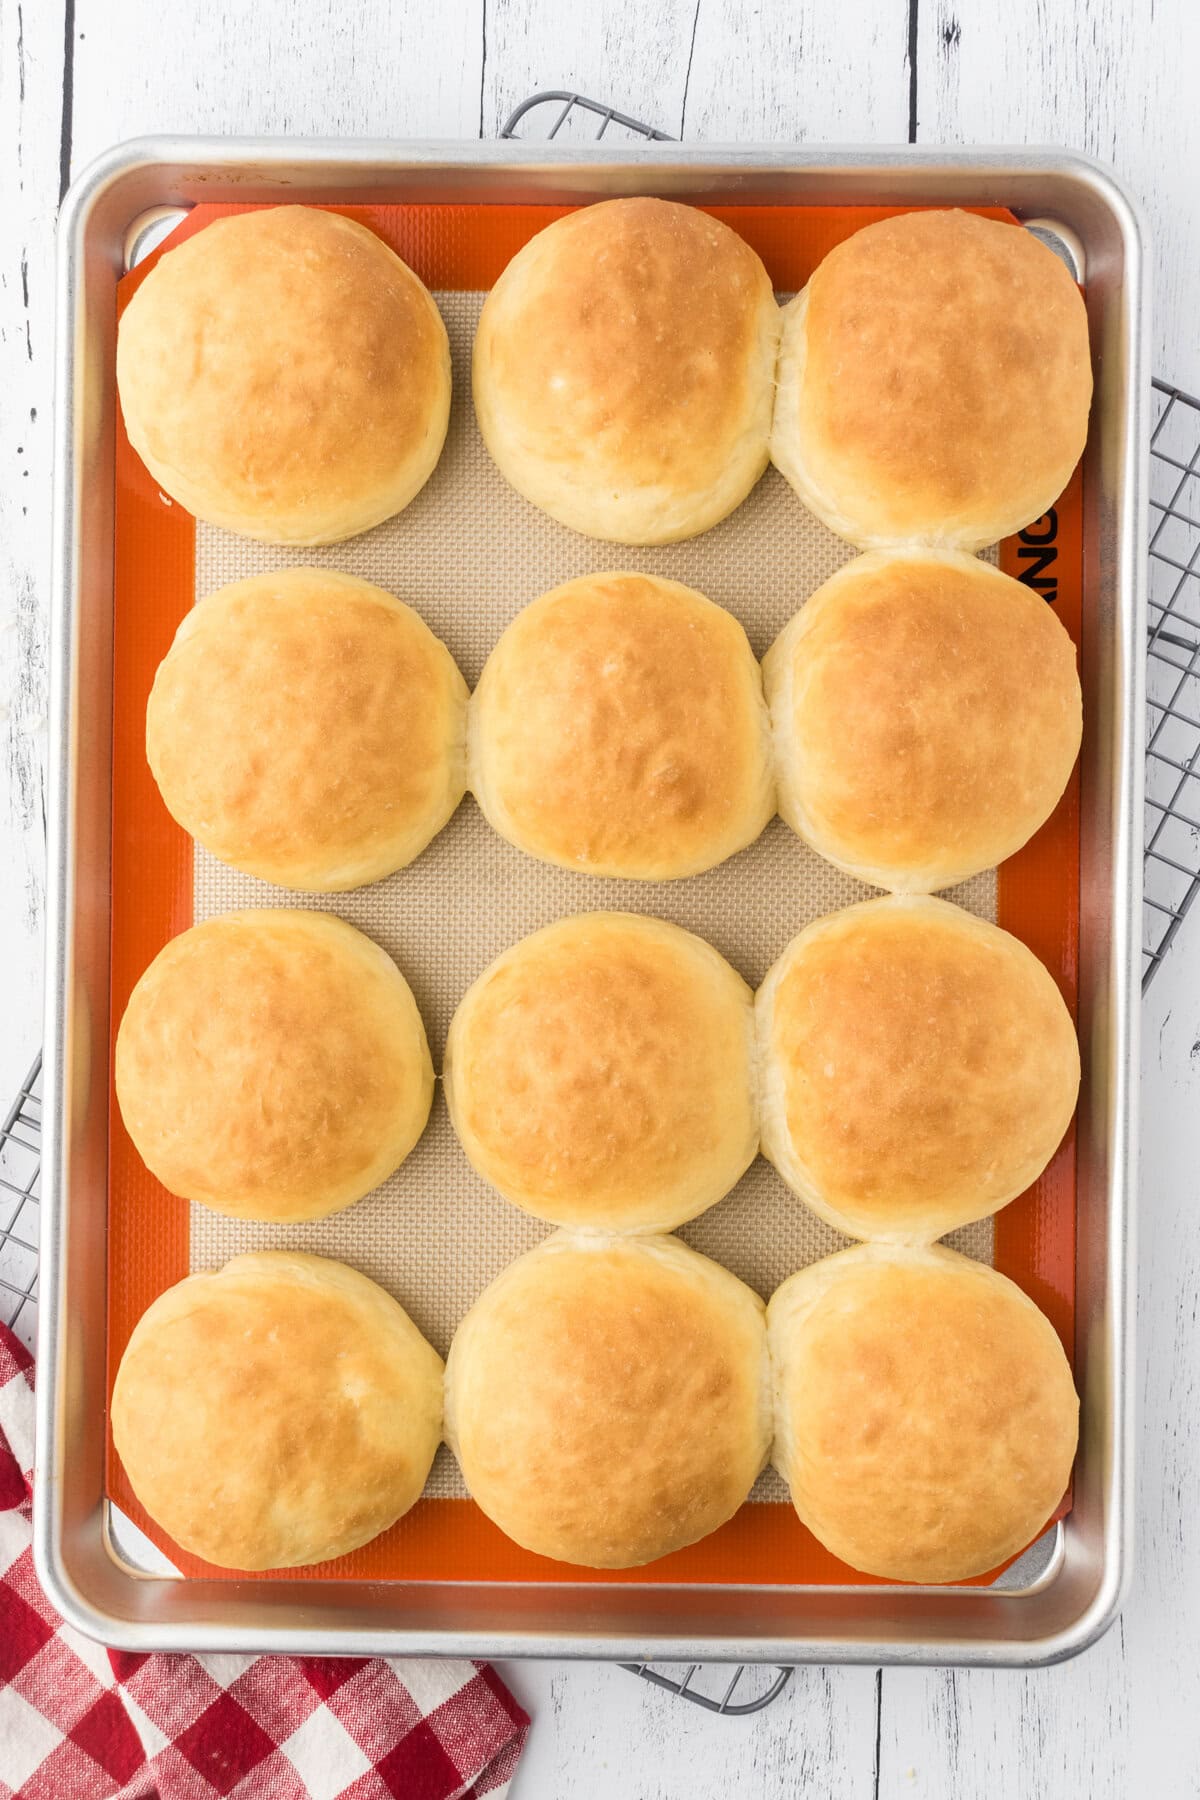 Buns are baked to a golden brown.